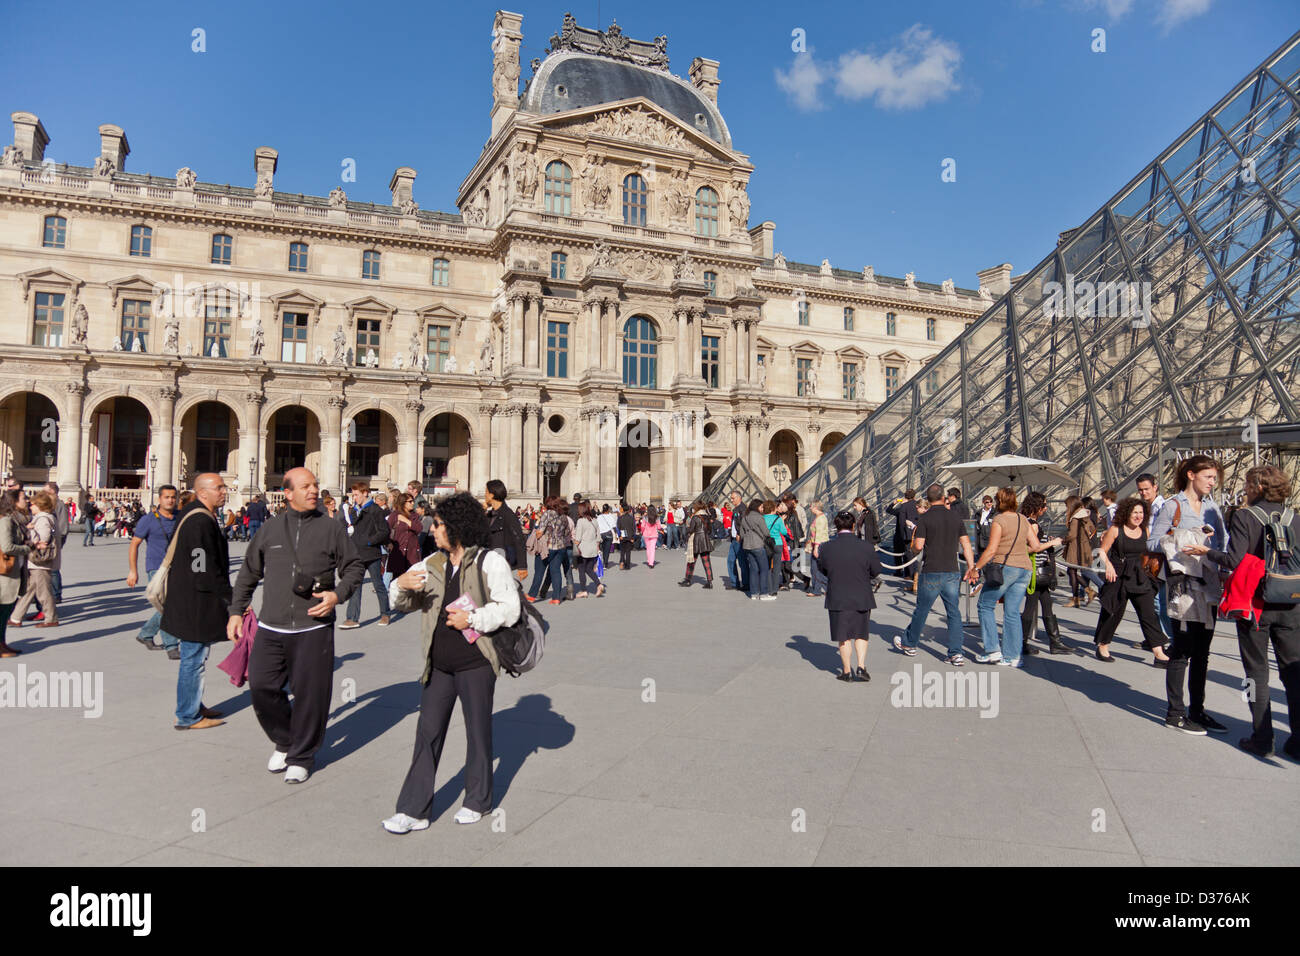 People in courtyard of the Louvre in Paris, France: the world's most visited museum. Pei's glass pyramid is the main entrance. Stock Photo